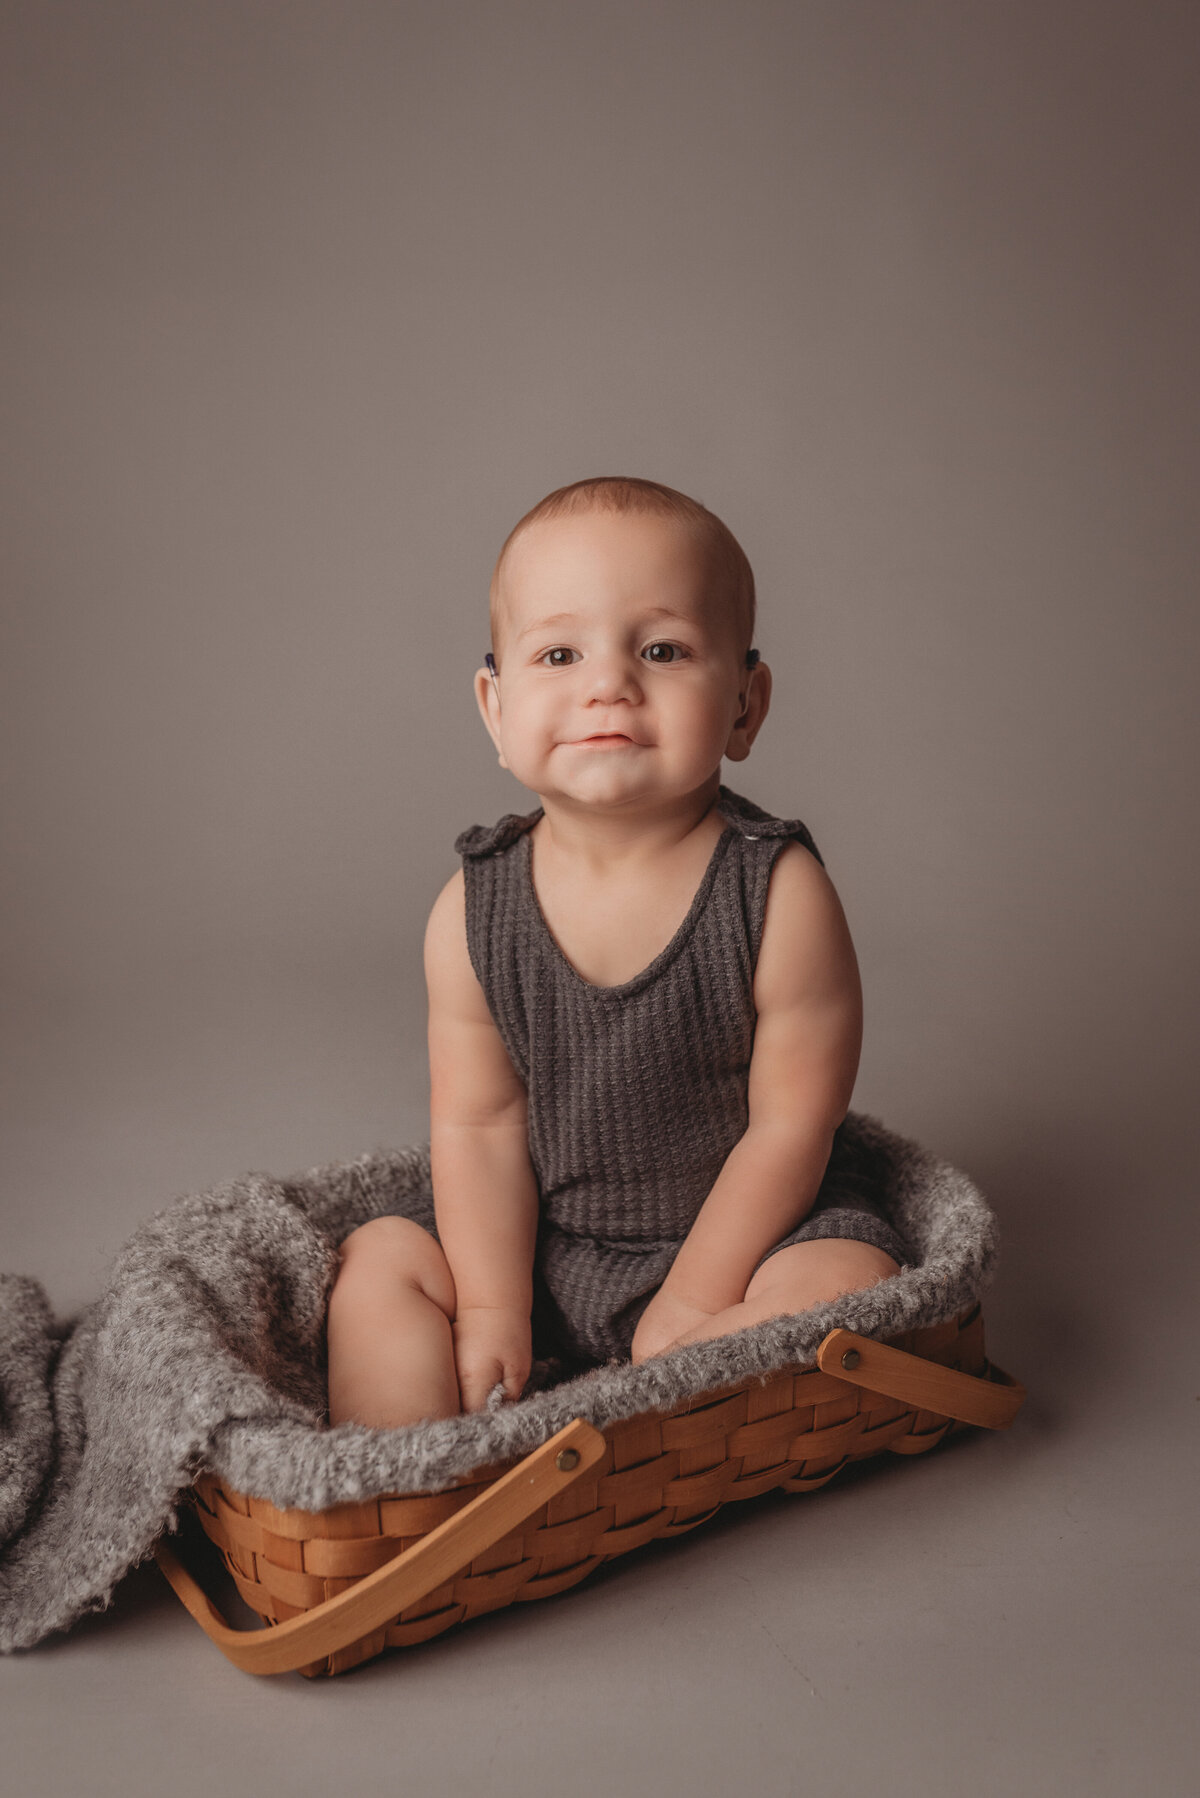 One year old baby boy wearing gray waffle knit romper sitting in basket posing for his portraits on a light gray backdrop